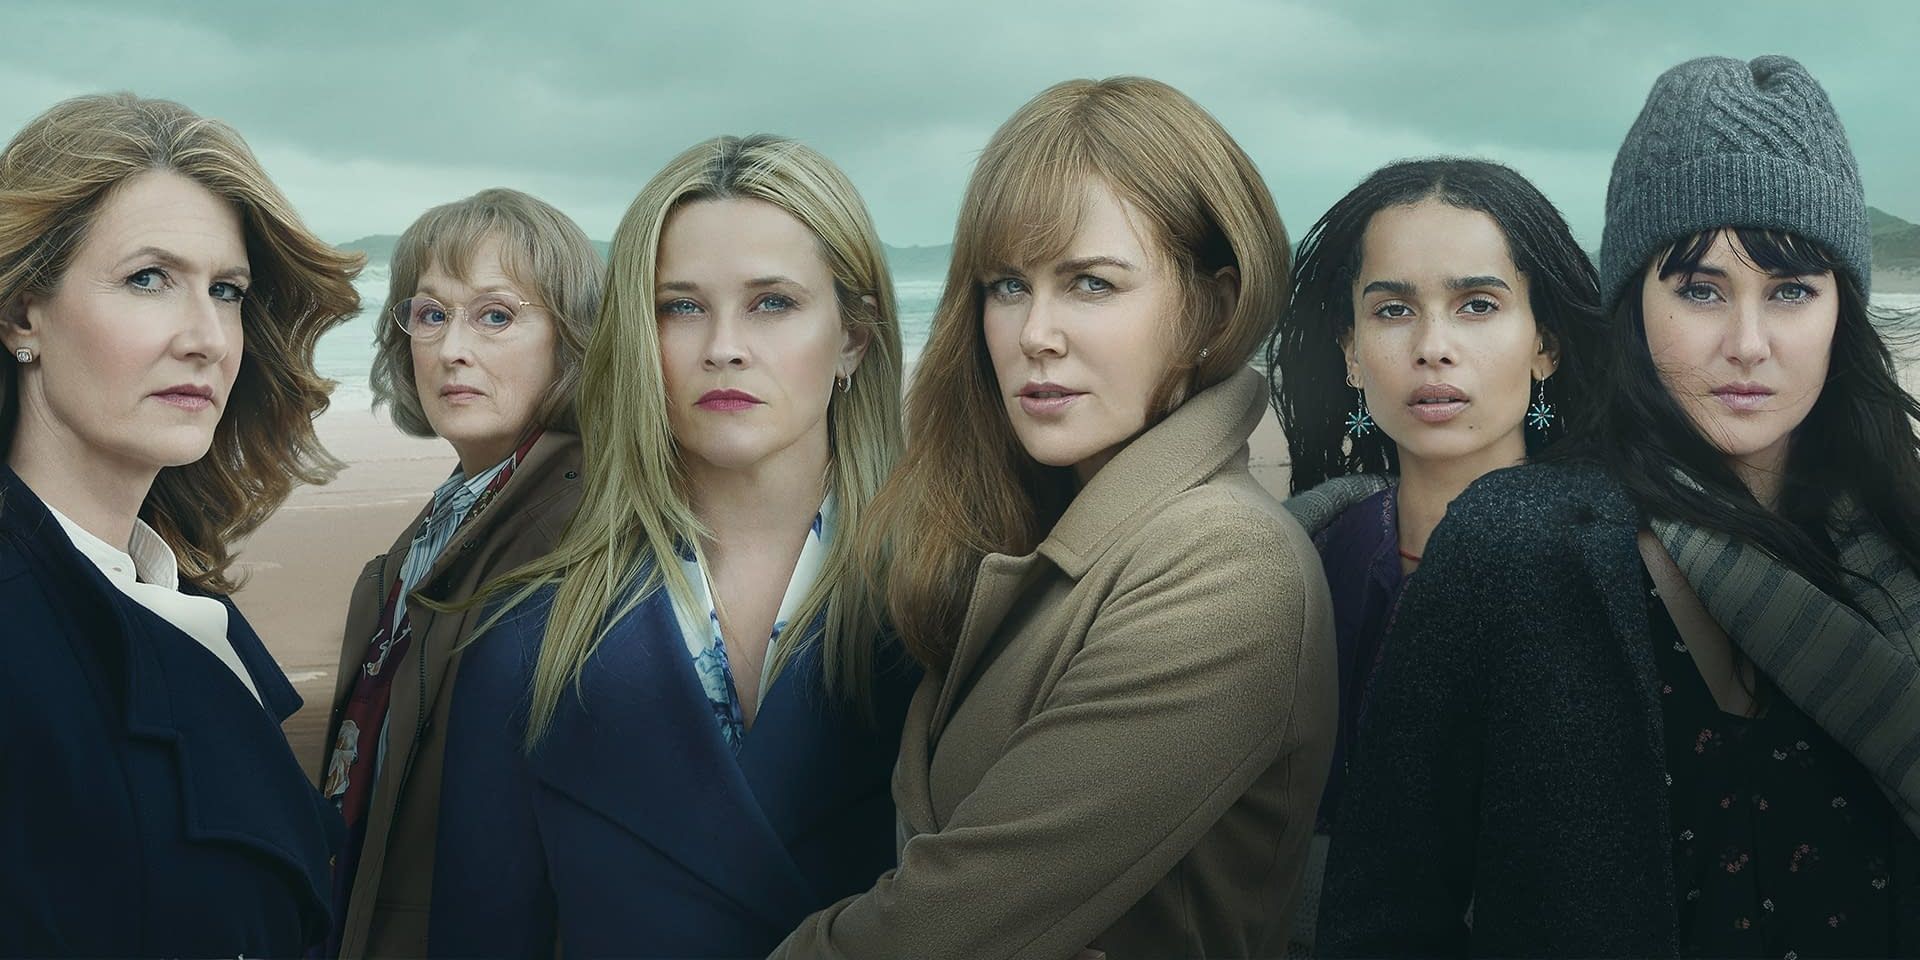 image of the cast of Big Little Lies including Nicole Kidman, Shailene Woodley, Reese Witherspoon